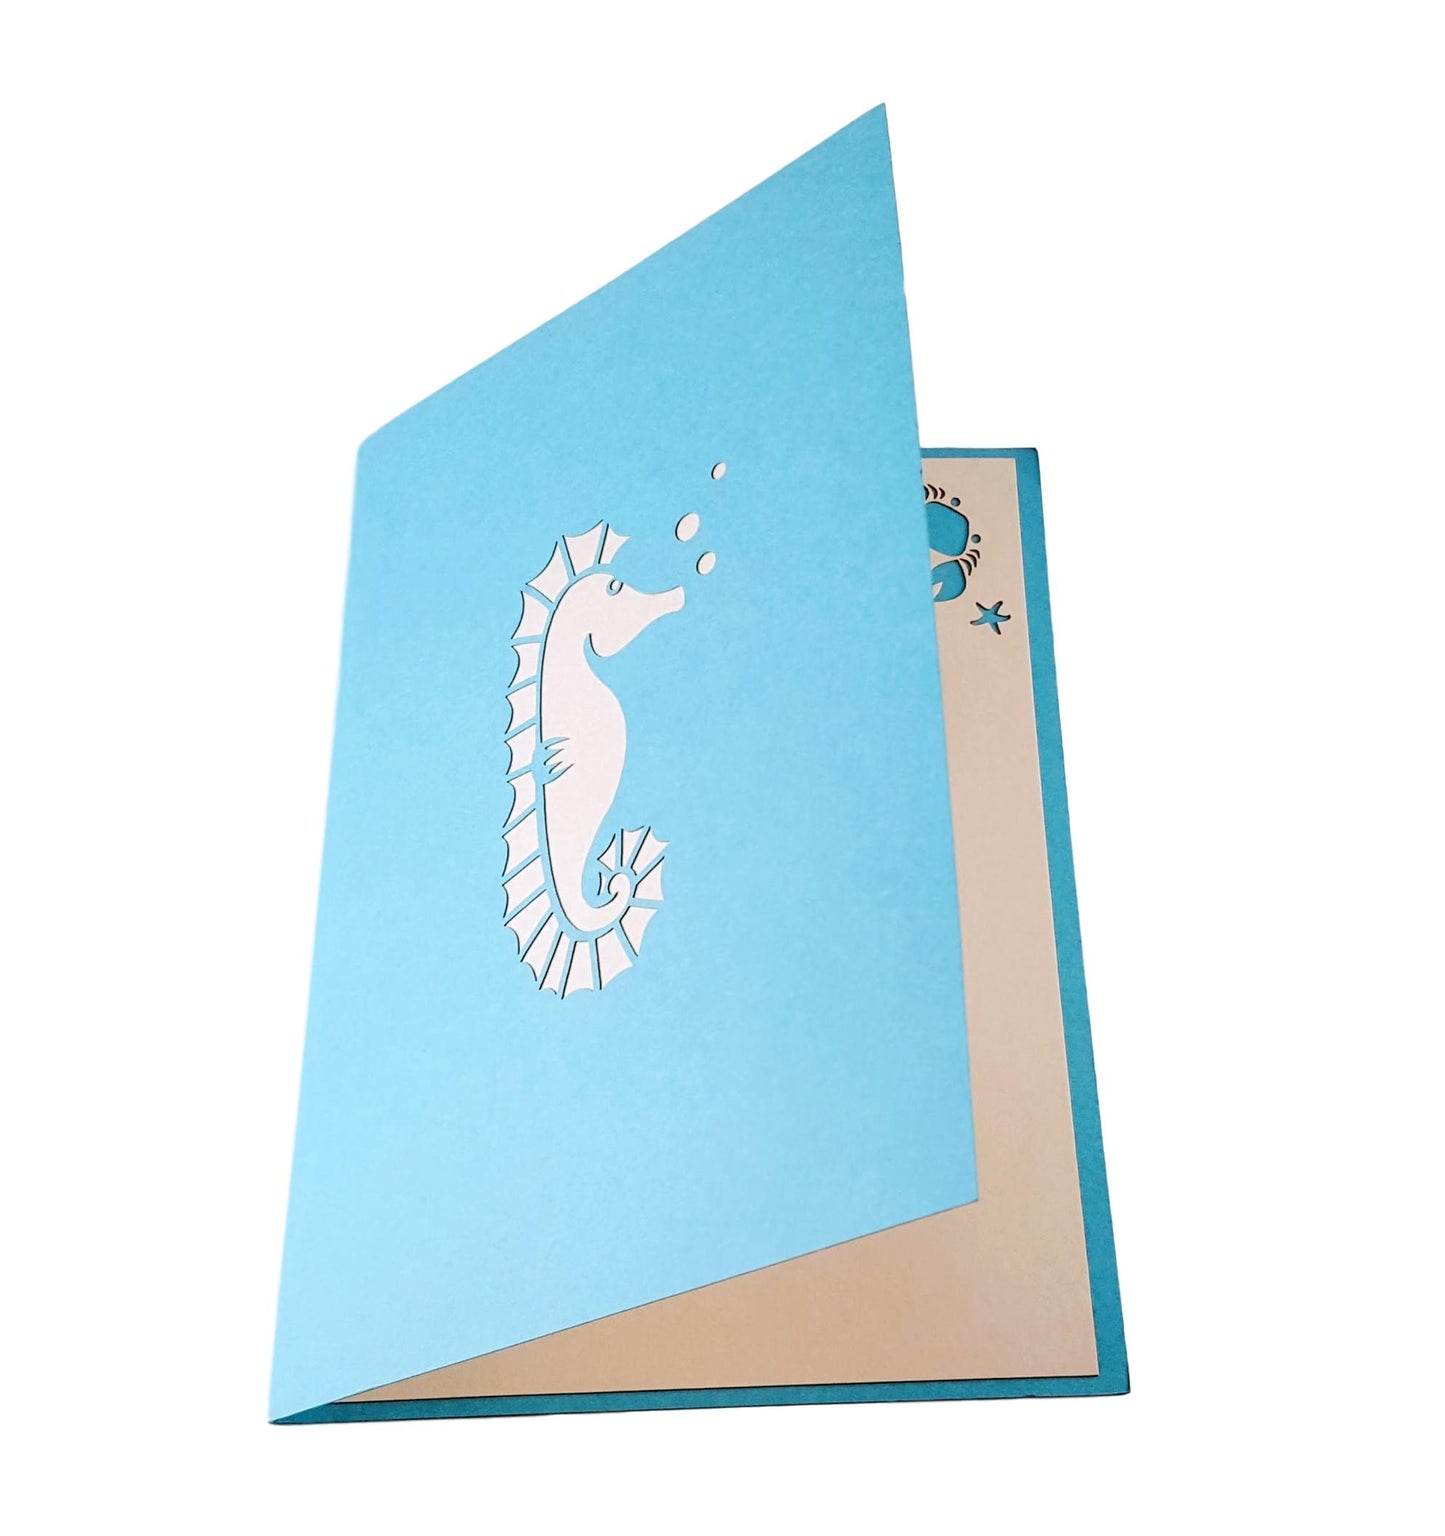 Mermaid 3D Pop Up Greeting Card - Fun - Just Because - Special Days - Thank You - iGifts And Cards